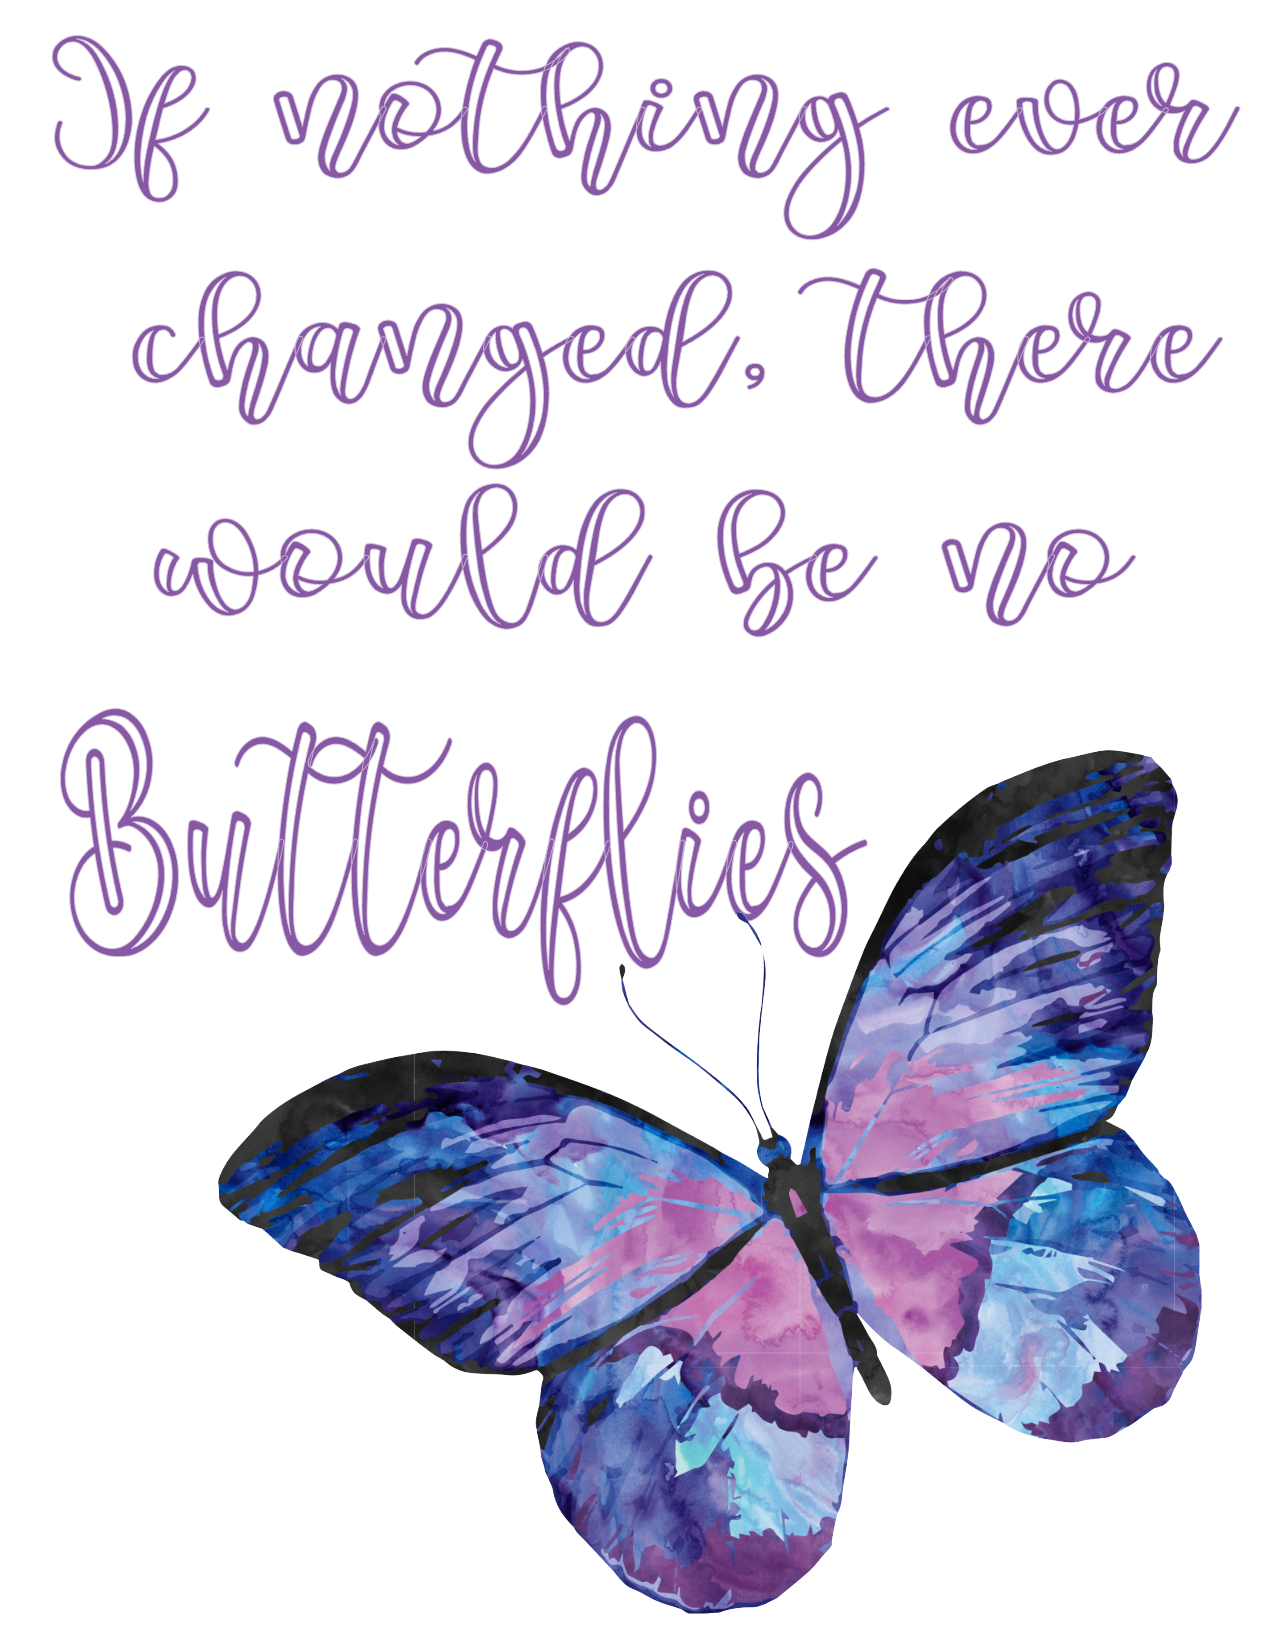 #289 If nothing changes there would be no Butterflies